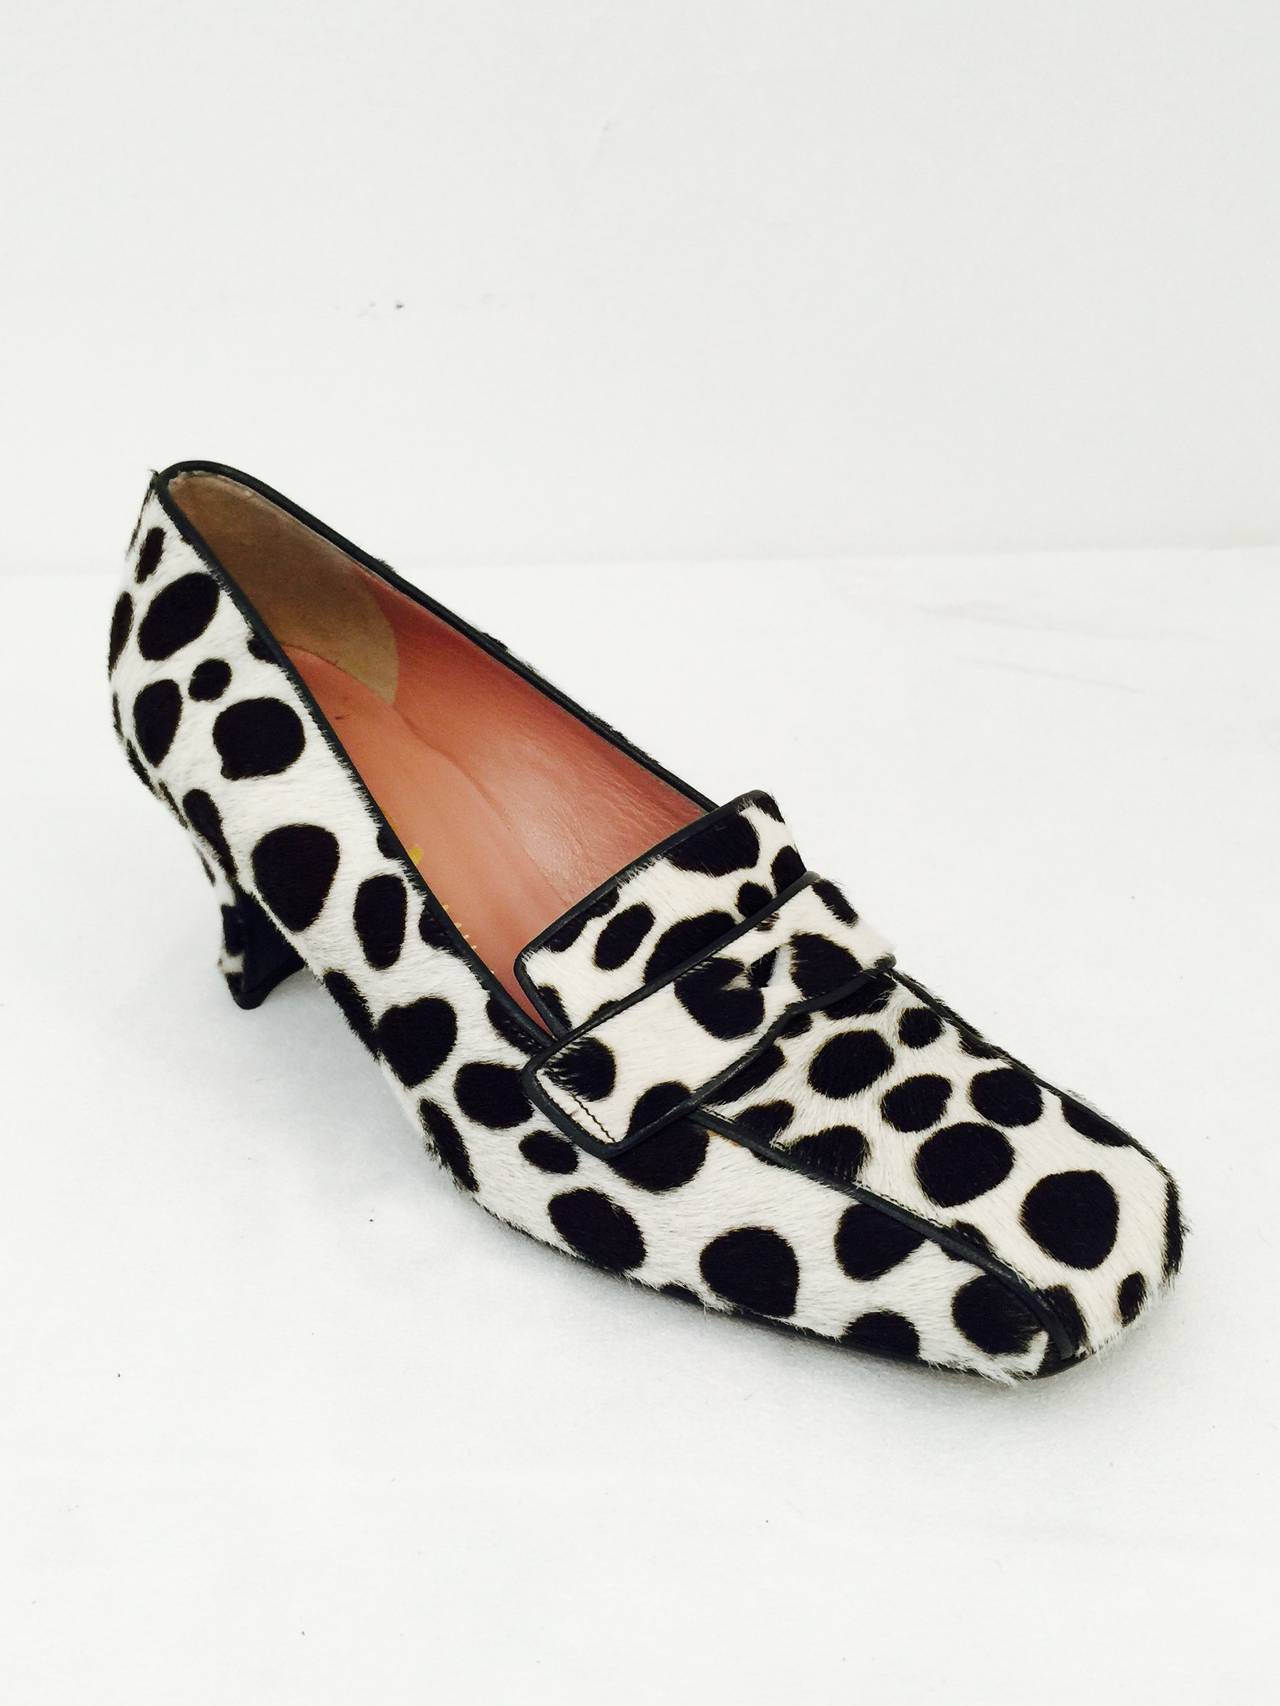 Prada Low Heel Loafer Pumps are a classic shape and style crafted in ultra-luxurious ponyskin!  Features square 